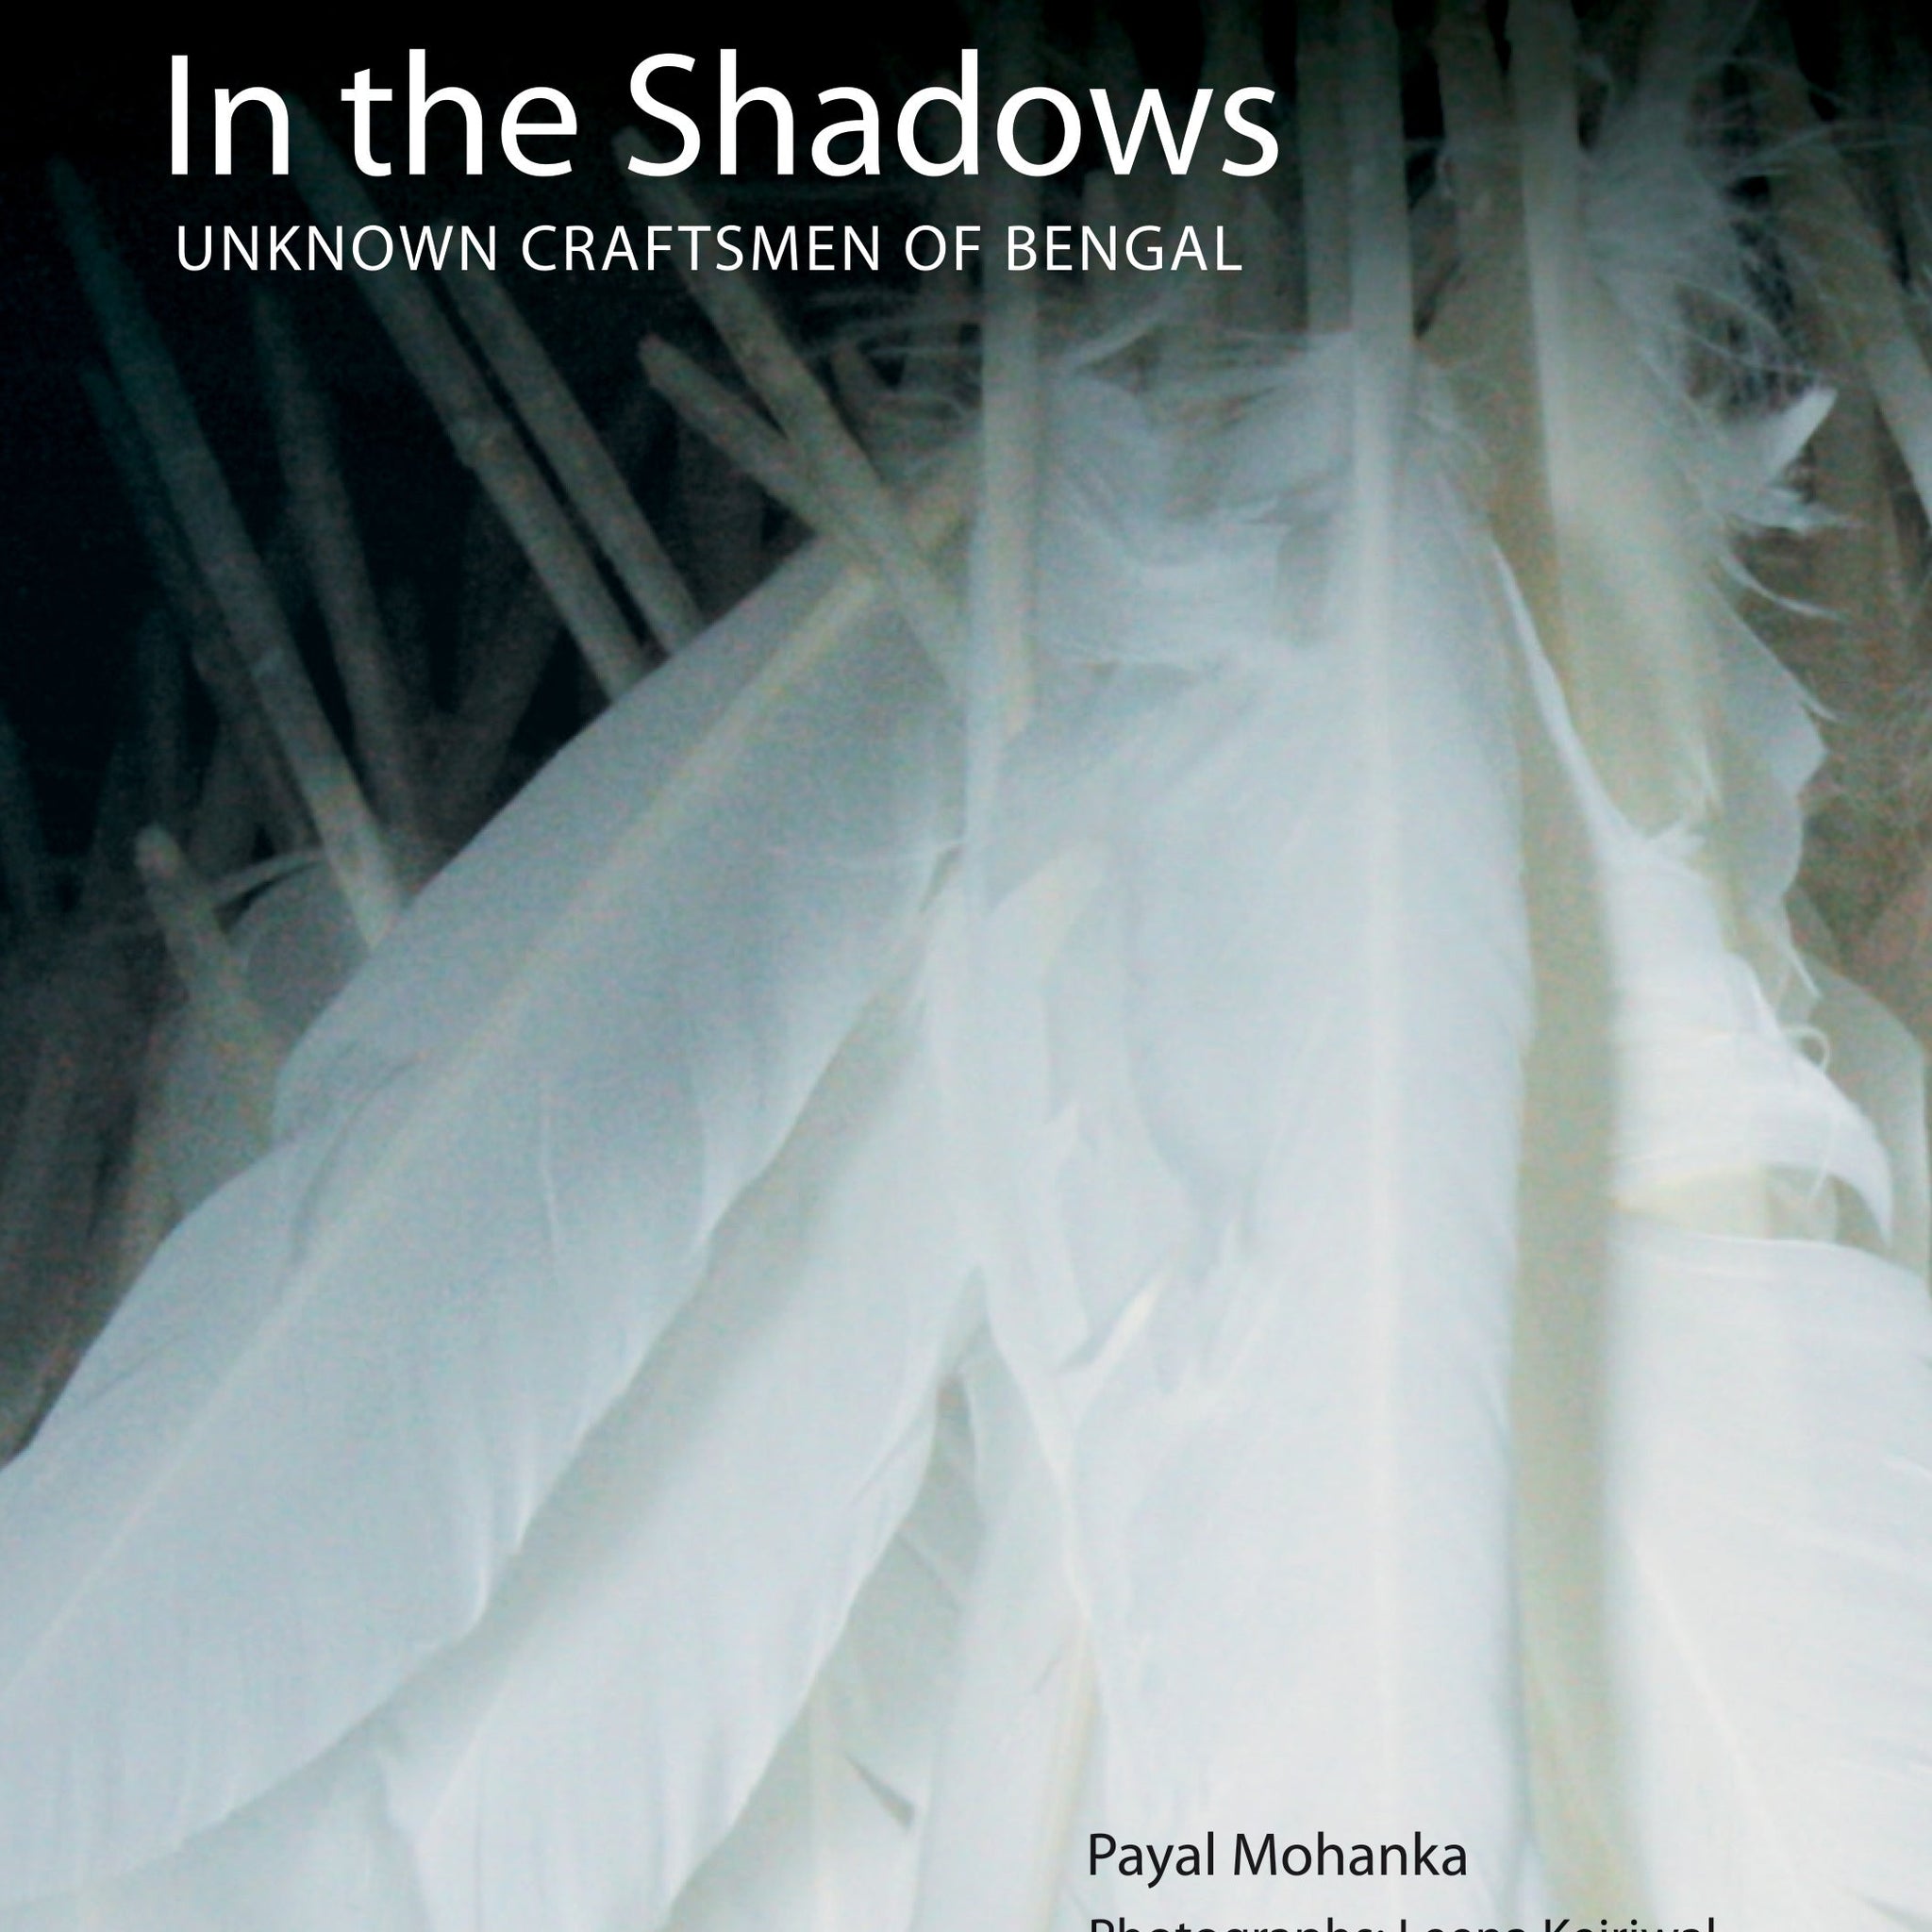 In The Shadows: Unknown Craftsmen of Bengal